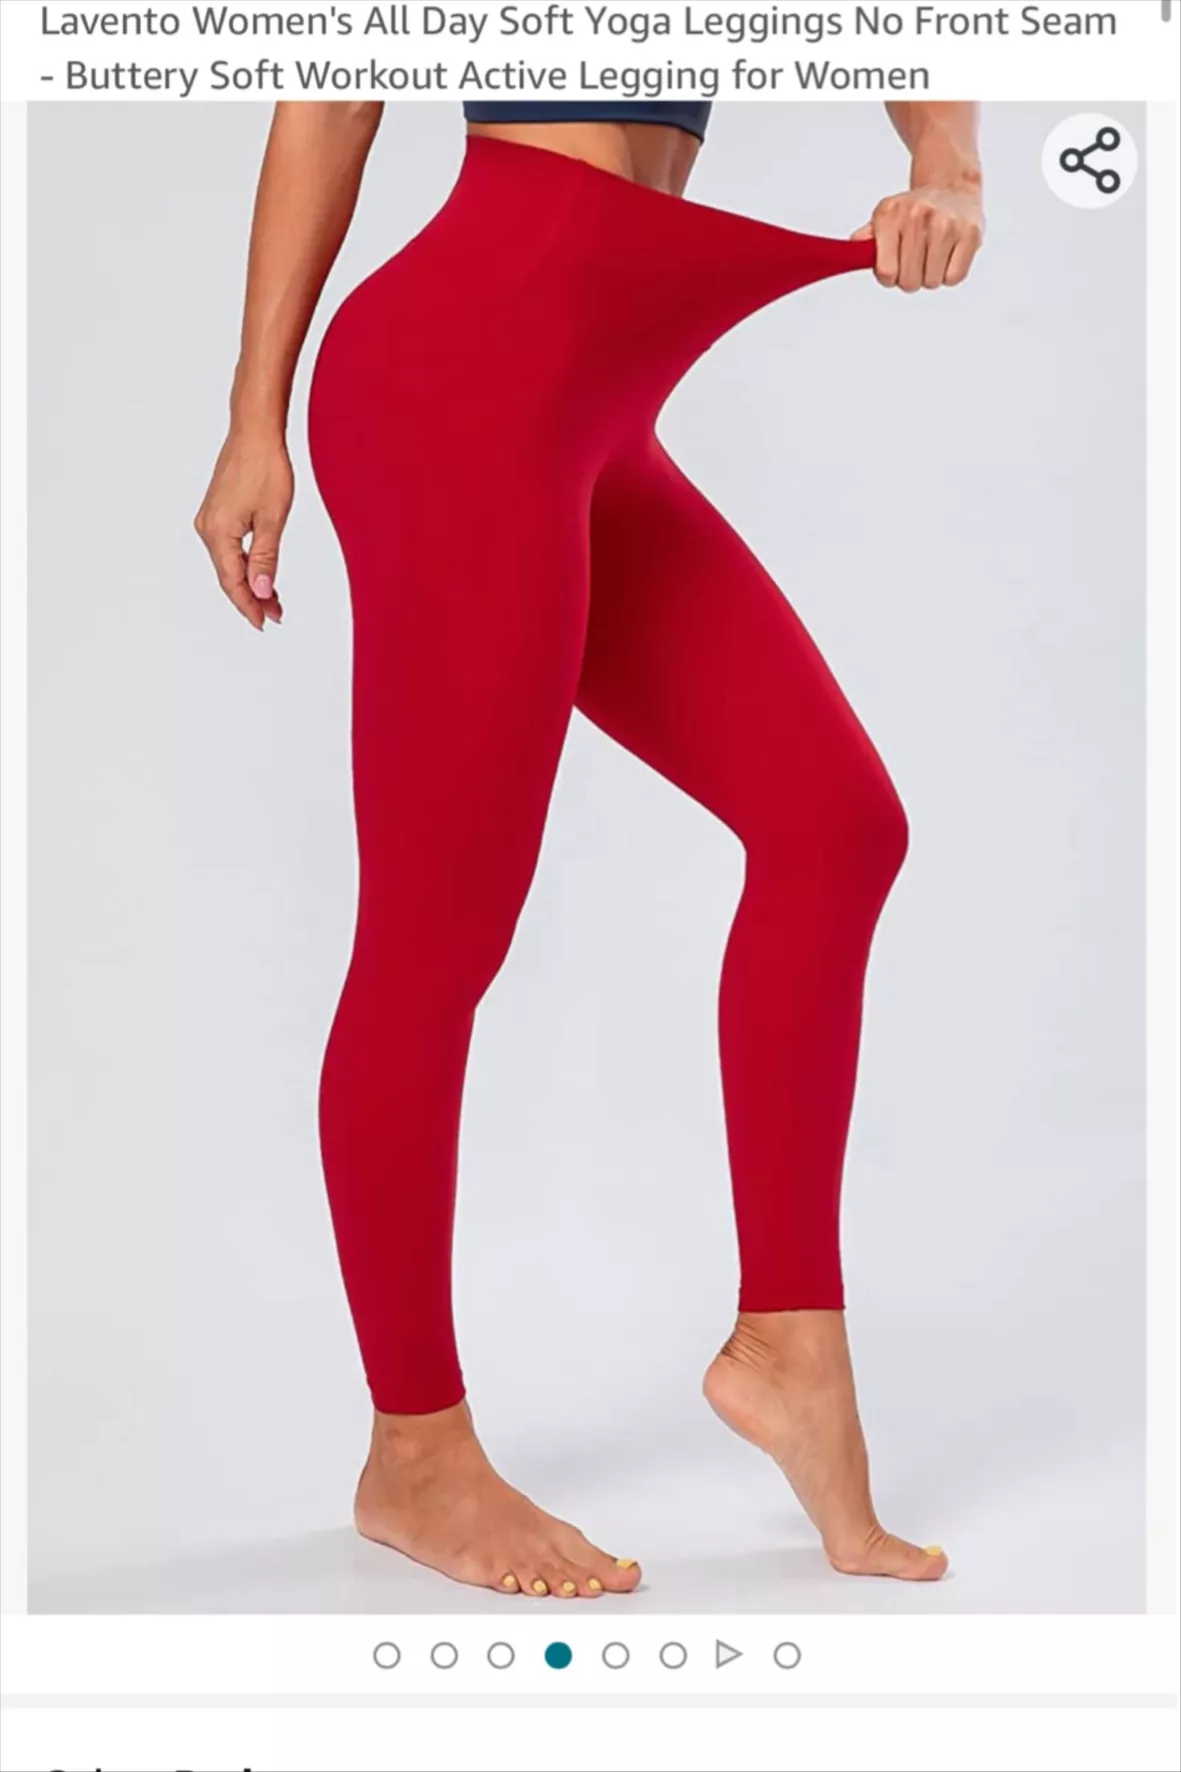 Our Point of View on Lavento Women's Soft Yoga Leggings From  